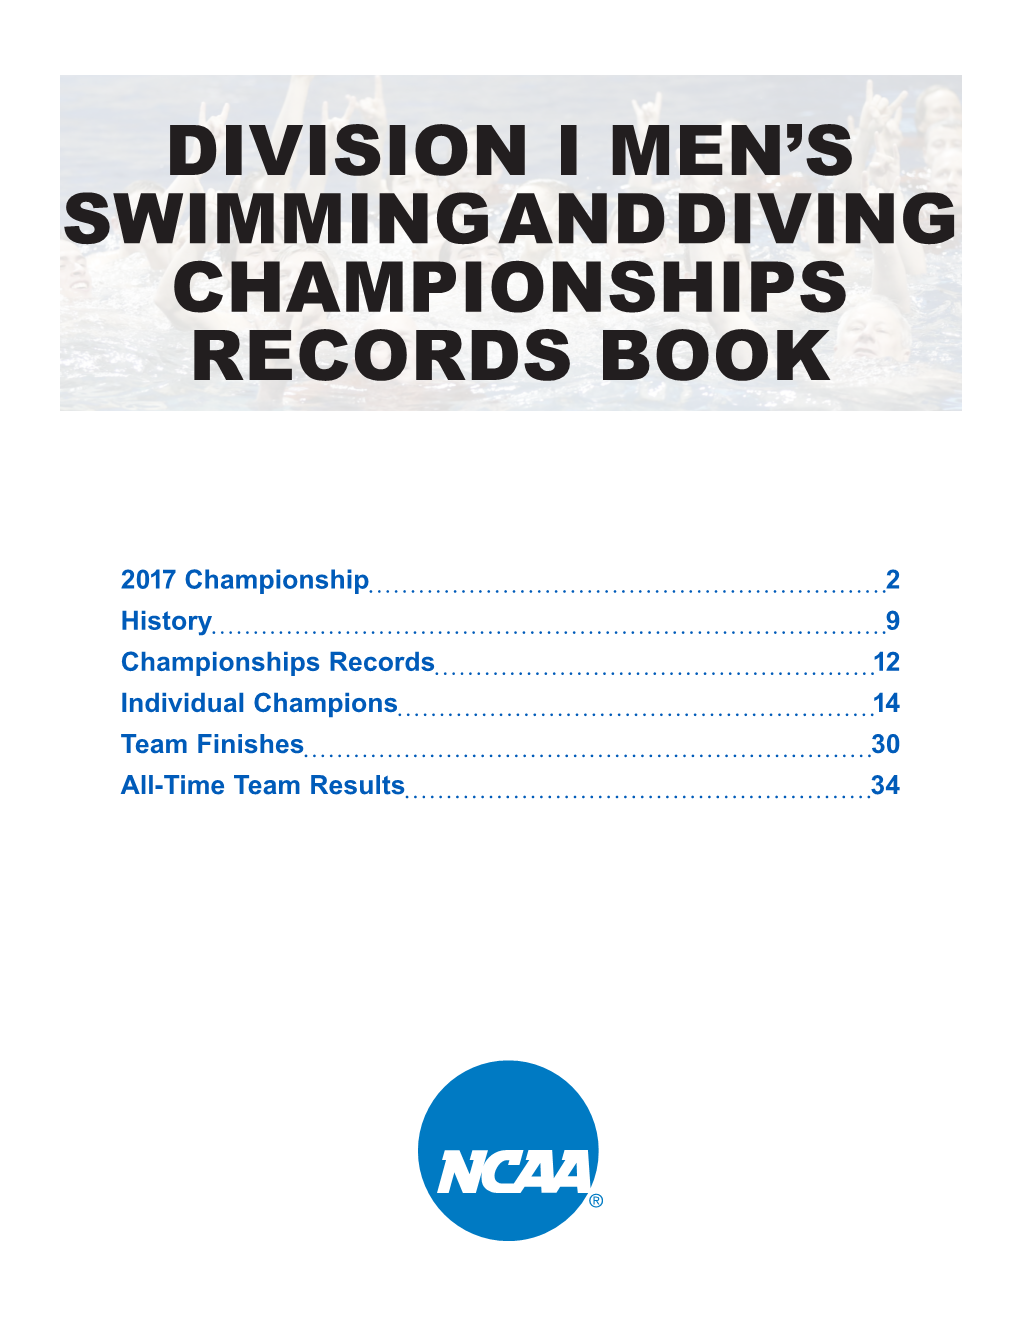 Division I Men's Swimming and Diving Championships Records Book